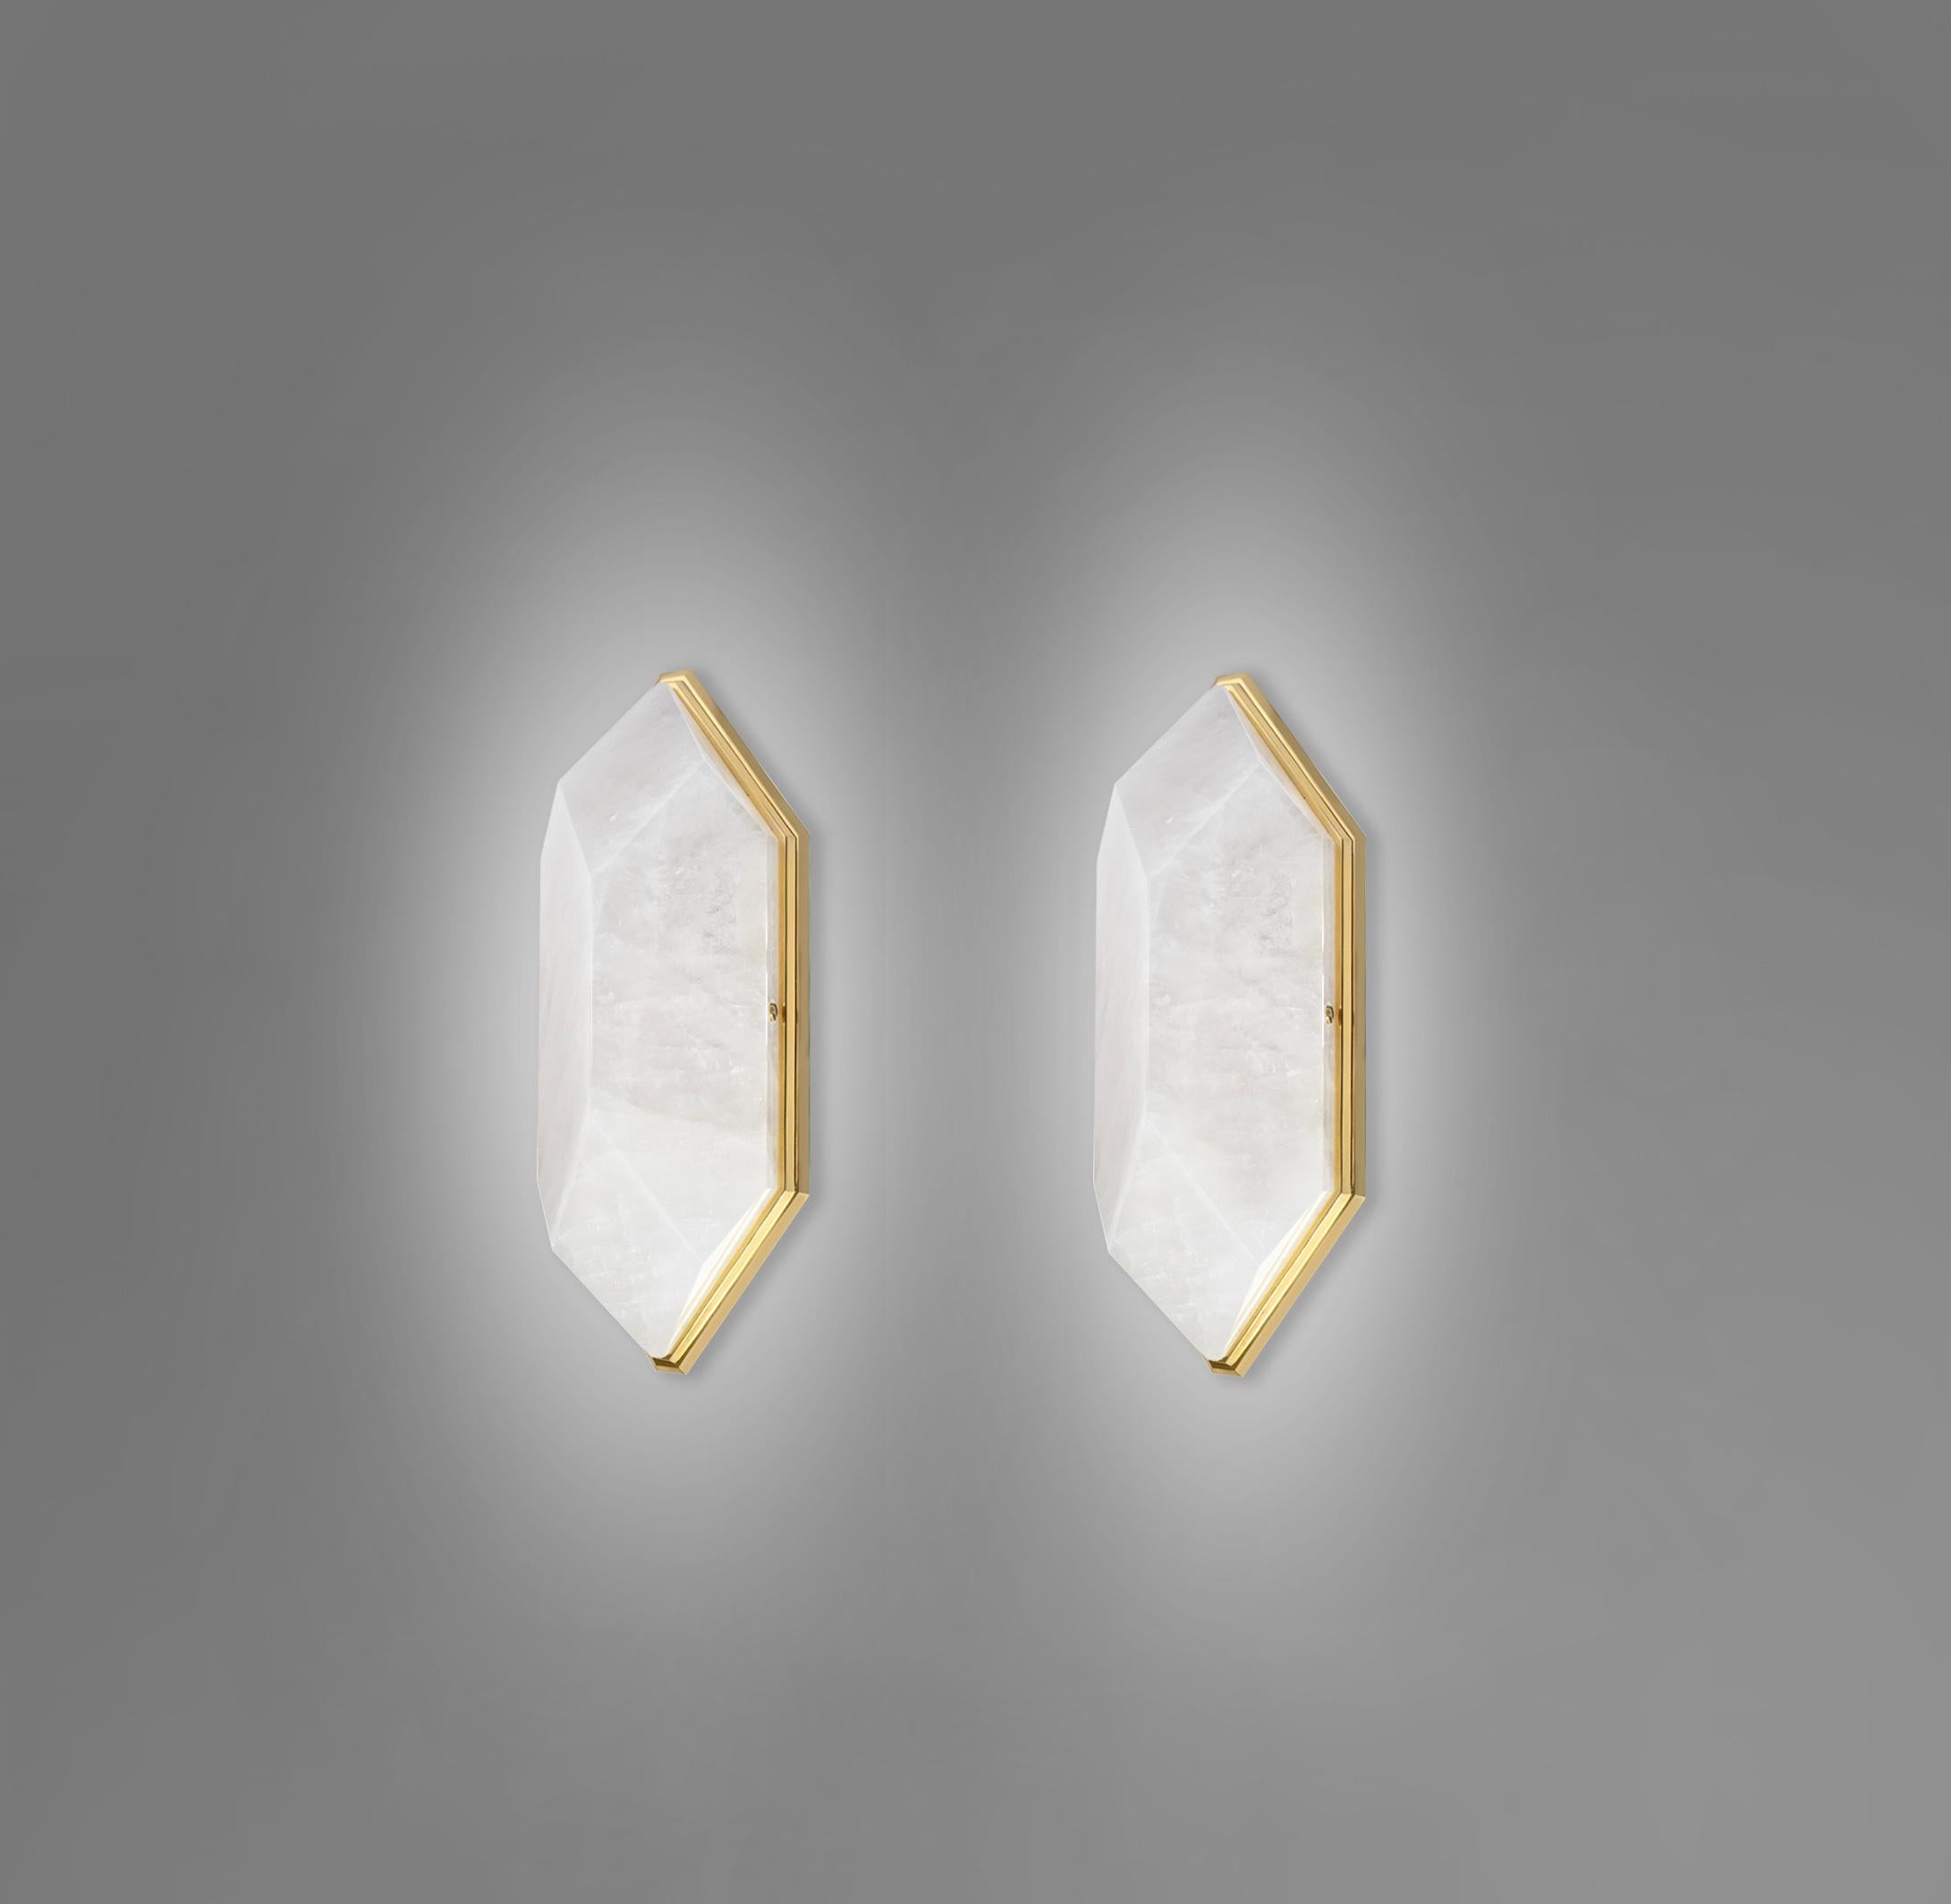 Pair of fine carved diamond form rock crystal sconces with polished brass mounts. Created by Phoenix Gallery.
Each sconce installs 2 sockets. 60 watts max each socket, total 120 watts.
  